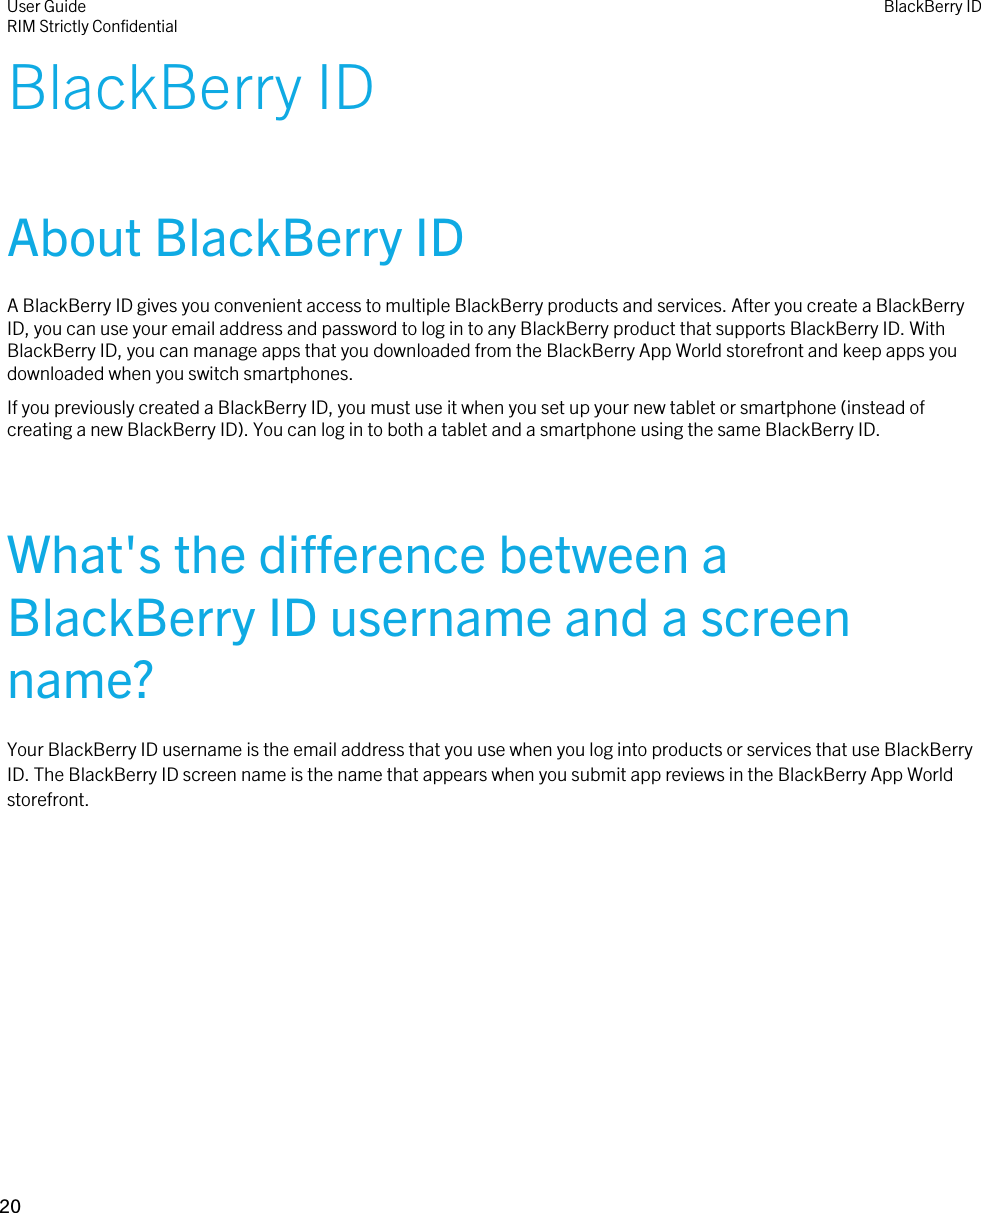 BlackBerry IDAbout BlackBerry IDA BlackBerry ID gives you convenient access to multiple BlackBerry products and services. After you create a BlackBerry ID, you can use your email address and password to log in to any BlackBerry product that supports BlackBerry ID. With BlackBerry ID, you can manage apps that you downloaded from the BlackBerry App World storefront and keep apps you downloaded when you switch smartphones.If you previously created a BlackBerry ID, you must use it when you set up your new tablet or smartphone (instead of creating a new BlackBerry ID). You can log in to both a tablet and a smartphone using the same BlackBerry ID.What&apos;s the difference between a BlackBerry ID username and a screen name?Your BlackBerry ID username is the email address that you use when you log into products or services that use BlackBerry ID. The BlackBerry ID screen name is the name that appears when you submit app reviews in the BlackBerry App World storefront.User GuideRIM Strictly ConfidentialBlackBerry ID20 